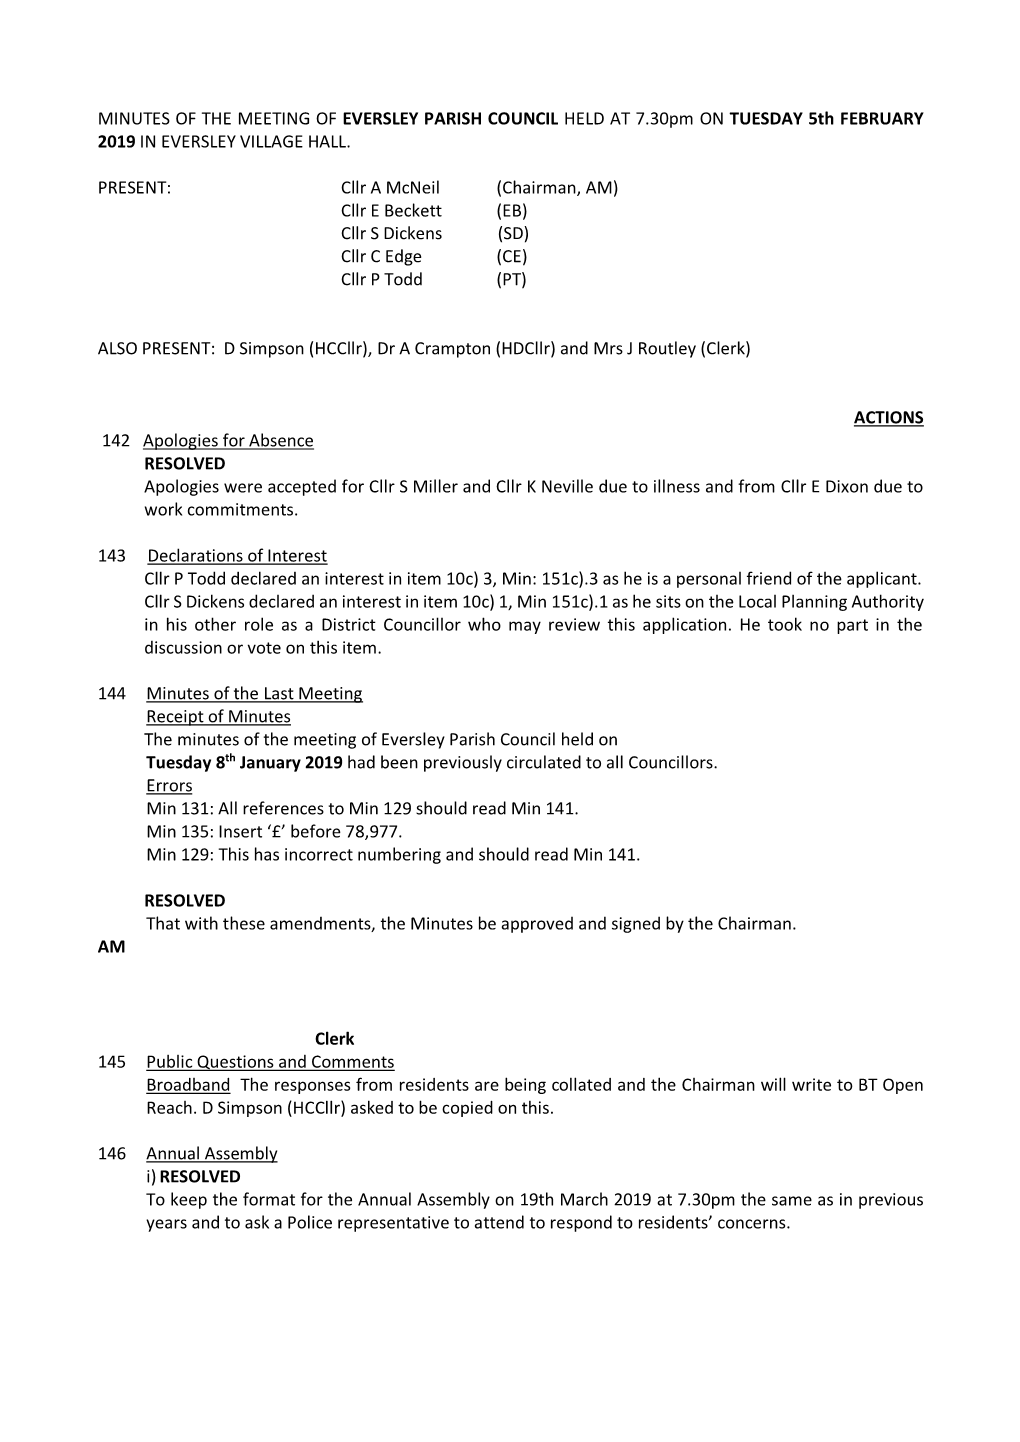 Minutes of the Meeting of the Eversley Parish Council